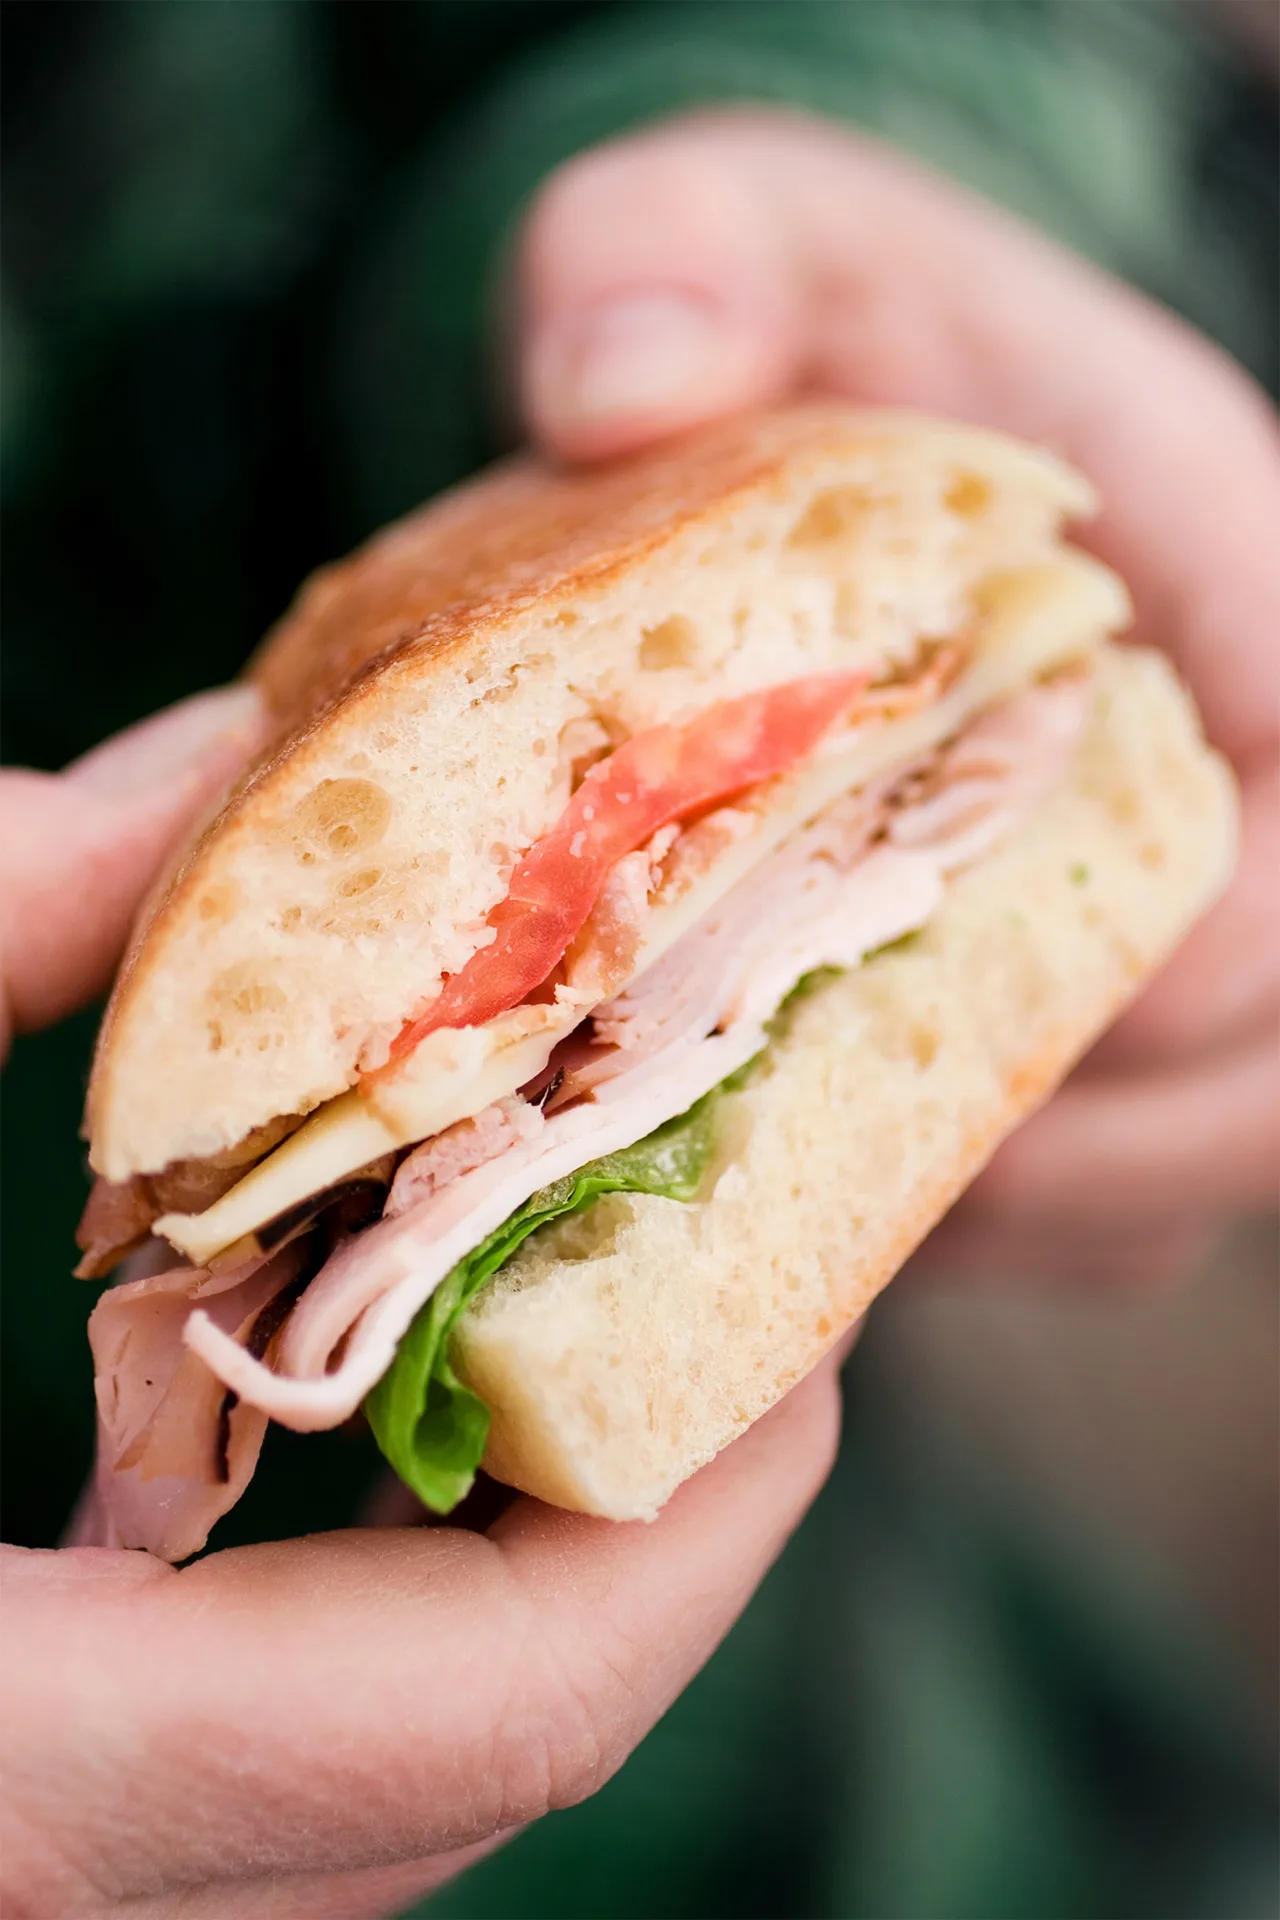 Closeup Of Sandwhich In Hand